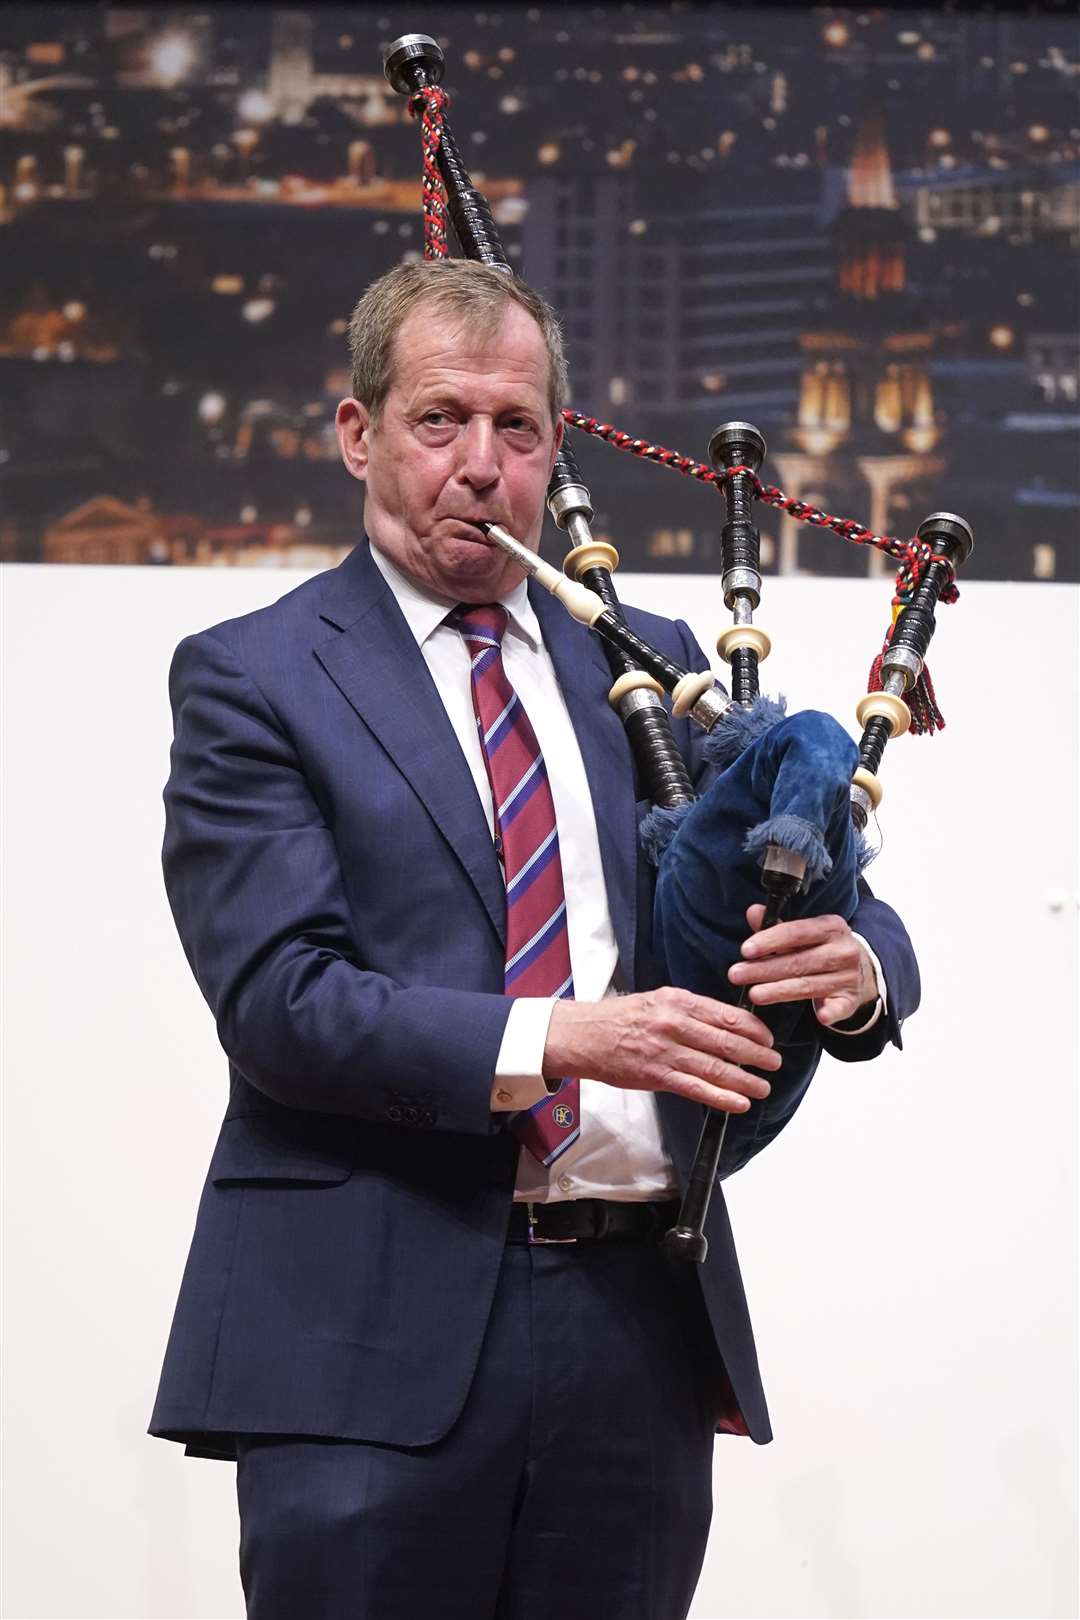 Alastair Campbell played a lament on the bagpipes during an event at Queen’s University Belfast to mark the 25th anniversary of the Good Friday Agreement (Niall Carson/PA)